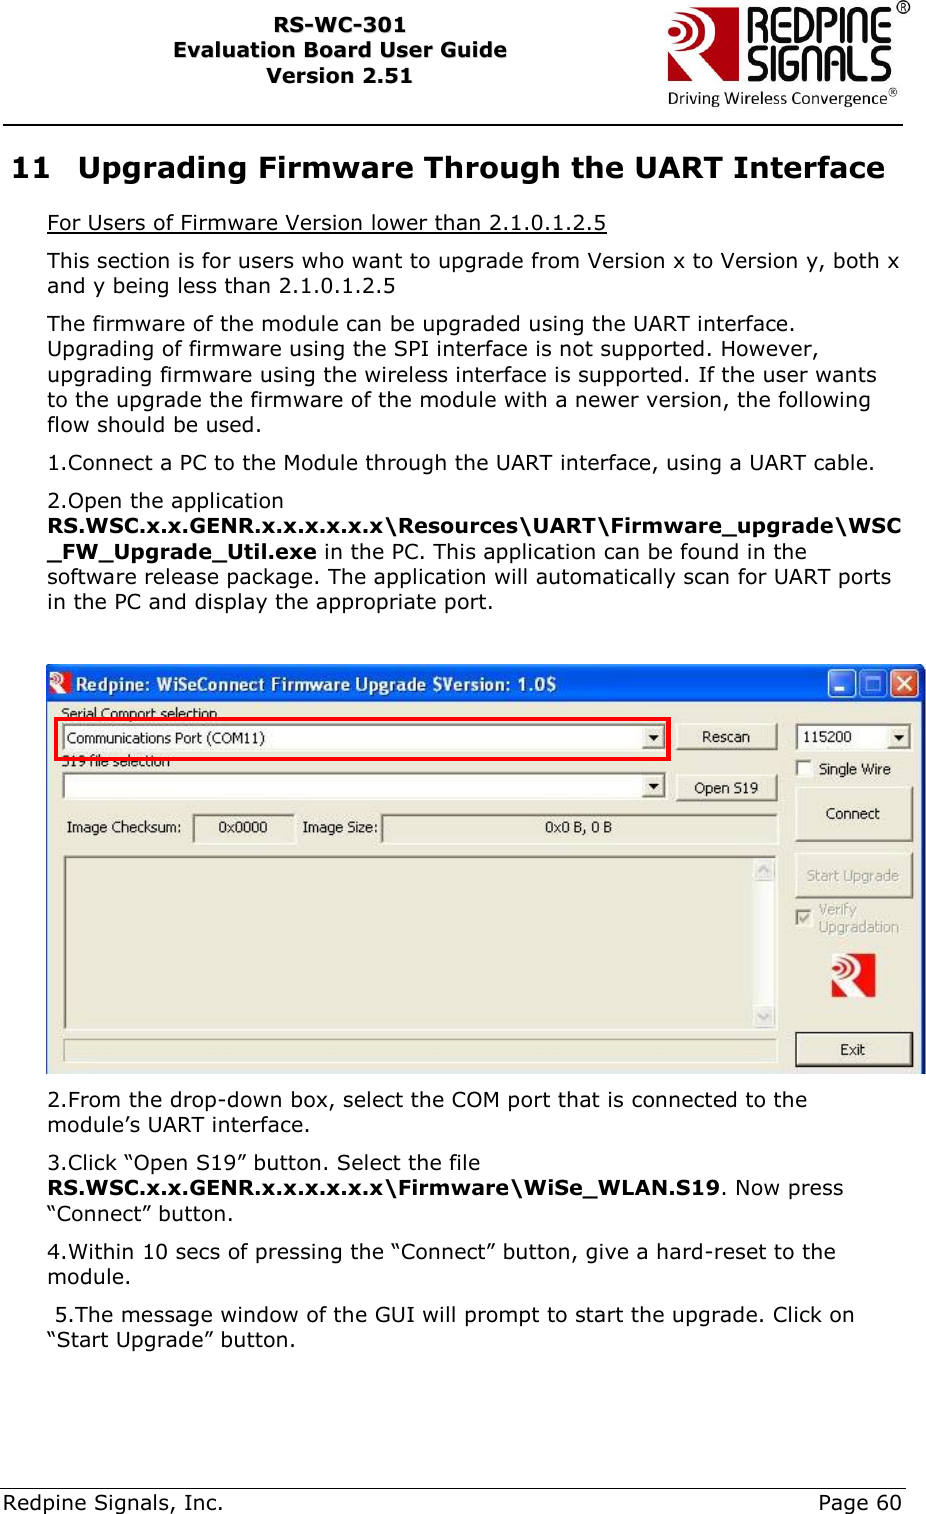     Redpine Signals, Inc.     Page 60 RRSS--WWCC--330011    EEvvaalluuaattiioonn  BBooaarrdd  UUsseerr  GGuuiiddee  VVeerrssiioonn  22..5511    11 Upgrading Firmware Through the UART Interface For Users of Firmware Version lower than 2.1.0.1.2.5 This section is for users who want to upgrade from Version x to Version y, both x and y being less than 2.1.0.1.2.5 The firmware of the module can be upgraded using the UART interface. Upgrading of firmware using the SPI interface is not supported. However, upgrading firmware using the wireless interface is supported. If the user wants to the upgrade the firmware of the module with a newer version, the following flow should be used. 1.Connect a PC to the Module through the UART interface, using a UART cable. 2.Open the application RS.WSC.x.x.GENR.x.x.x.x.x.x\Resources\UART\Firmware_upgrade\WSC_FW_Upgrade_Util.exe in the PC. This application can be found in the software release package. The application will automatically scan for UART ports in the PC and display the appropriate port.     2.From the drop-down box, select the COM port that is connected to the module‟s UART interface. 3.Click “Open S19” button. Select the file RS.WSC.x.x.GENR.x.x.x.x.x.x\Firmware\WiSe_WLAN.S19. Now press “Connect” button. 4.Within 10 secs of pressing the “Connect” button, give a hard-reset to the module.  5.The message window of the GUI will prompt to start the upgrade. Click on “Start Upgrade” button.  